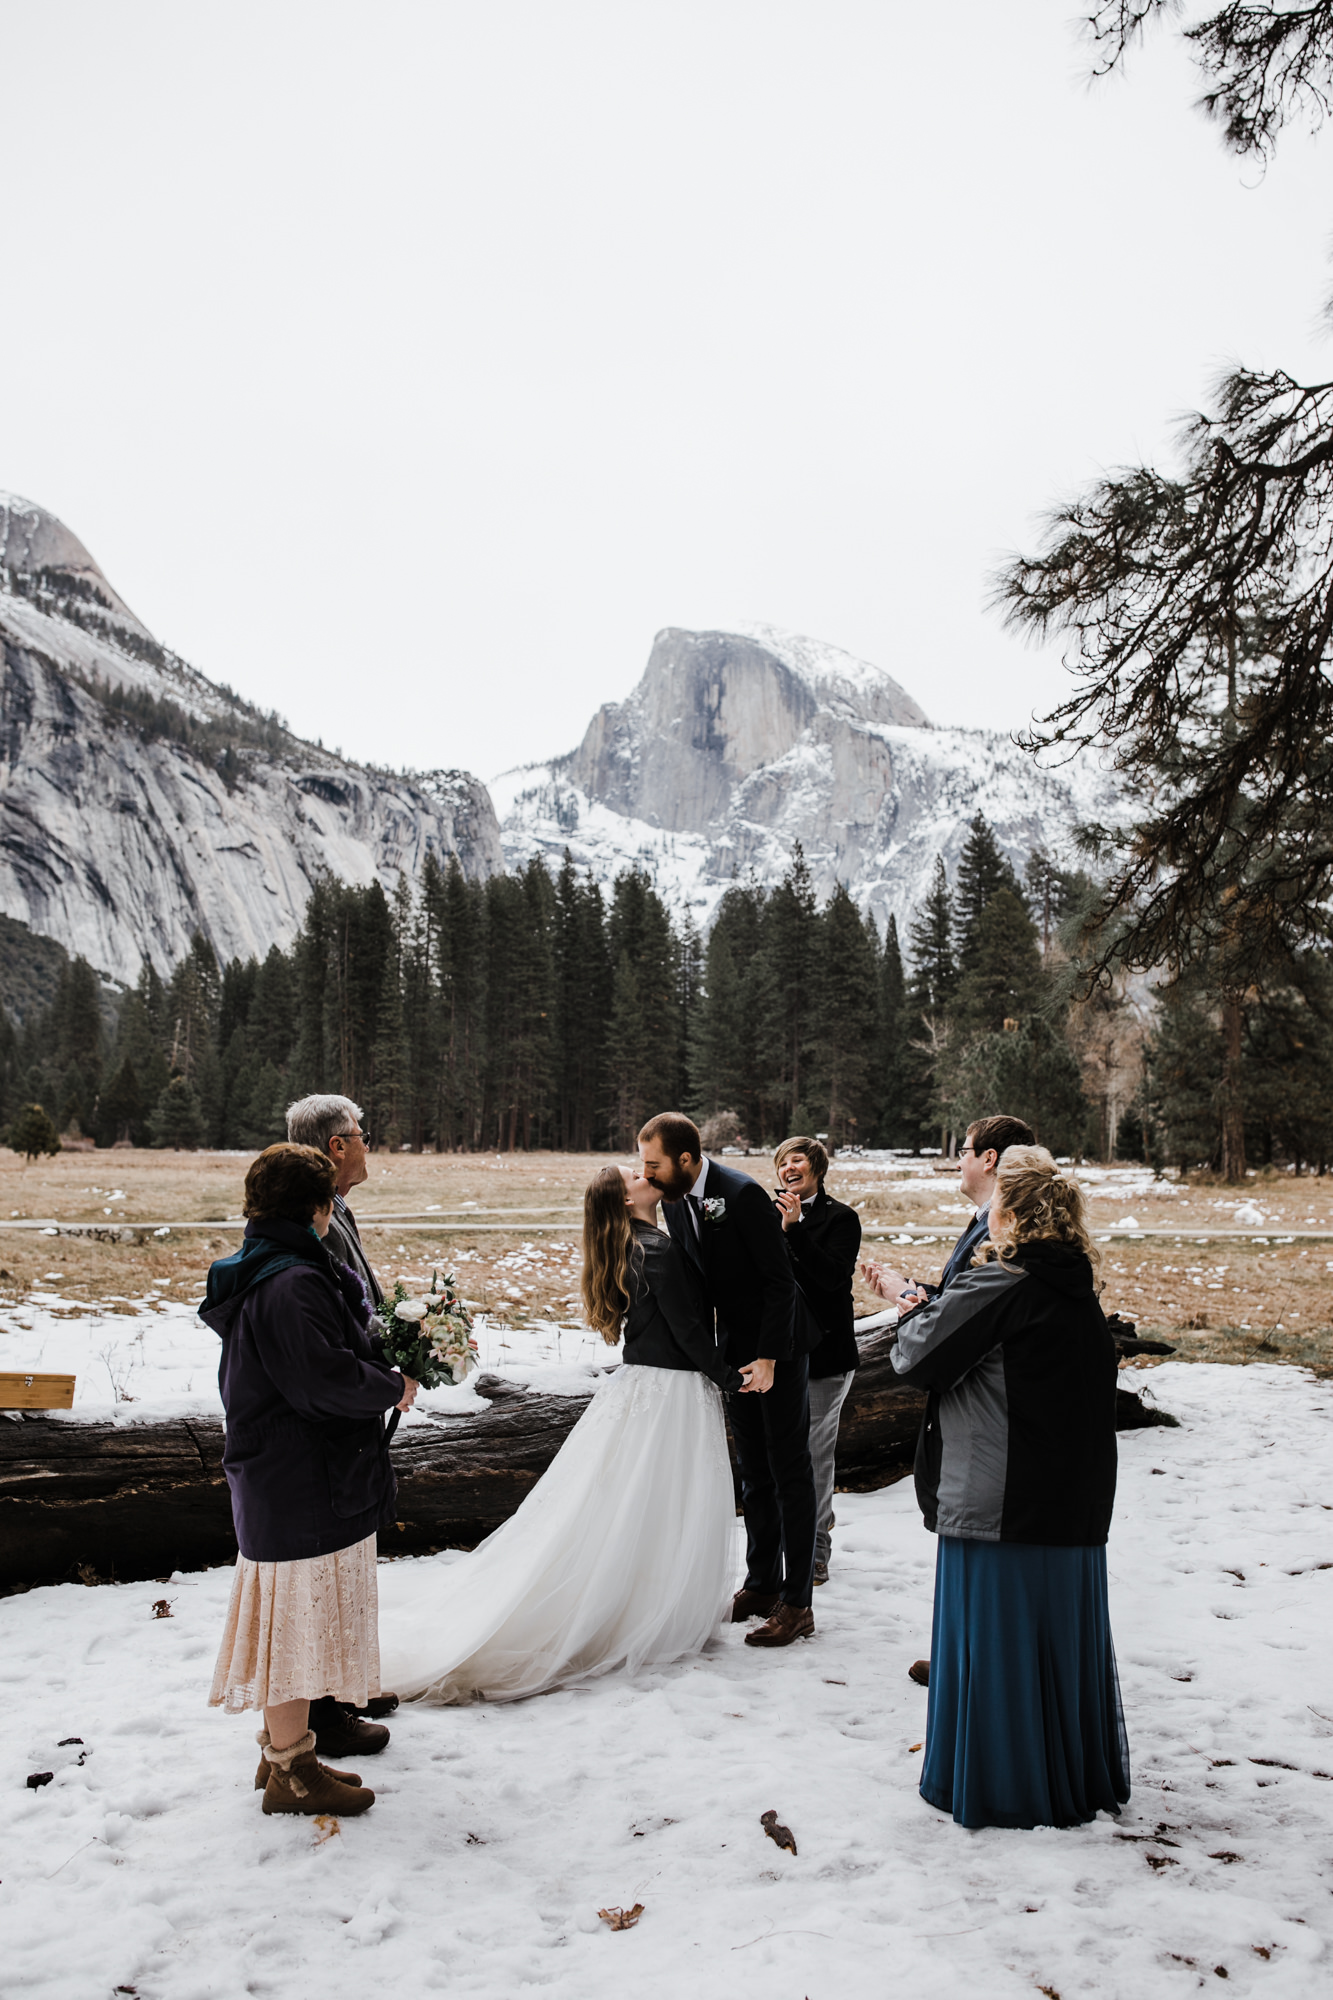 snowy elopement wedding ceremony in yosemite national park | The Hearnes Adventure Photography